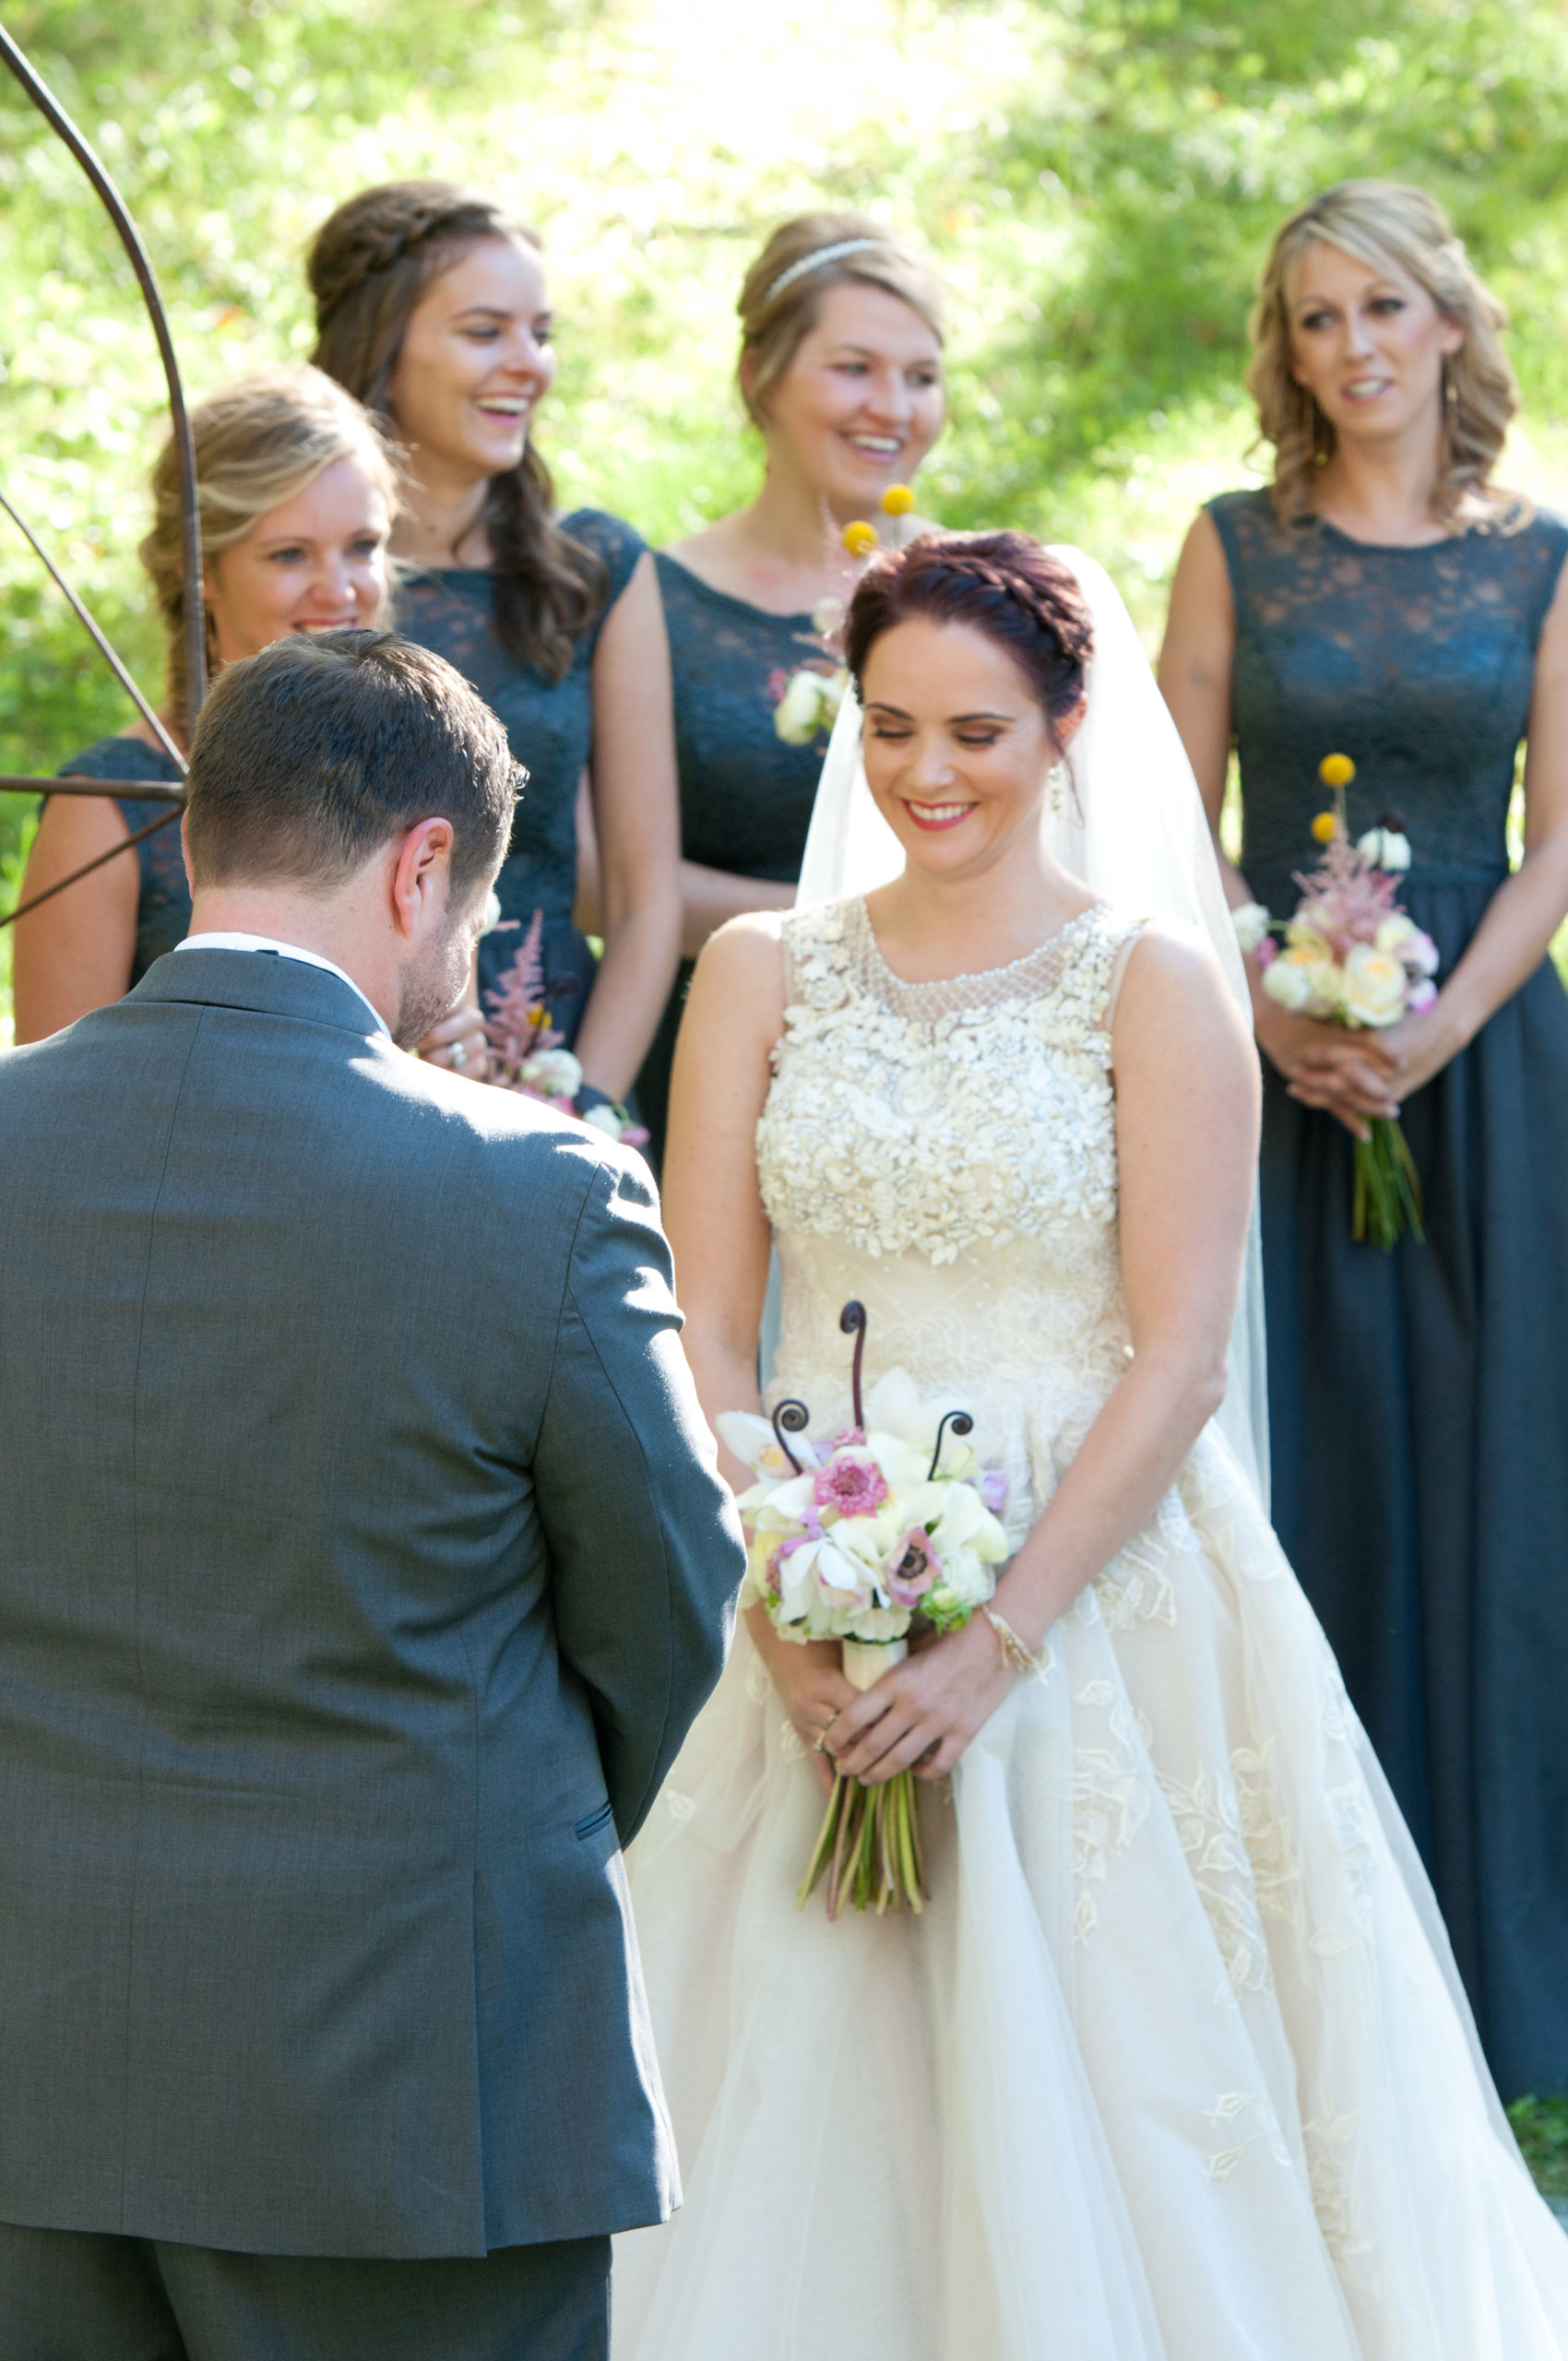 Bride smiling at groom during ceremony in Minnesota